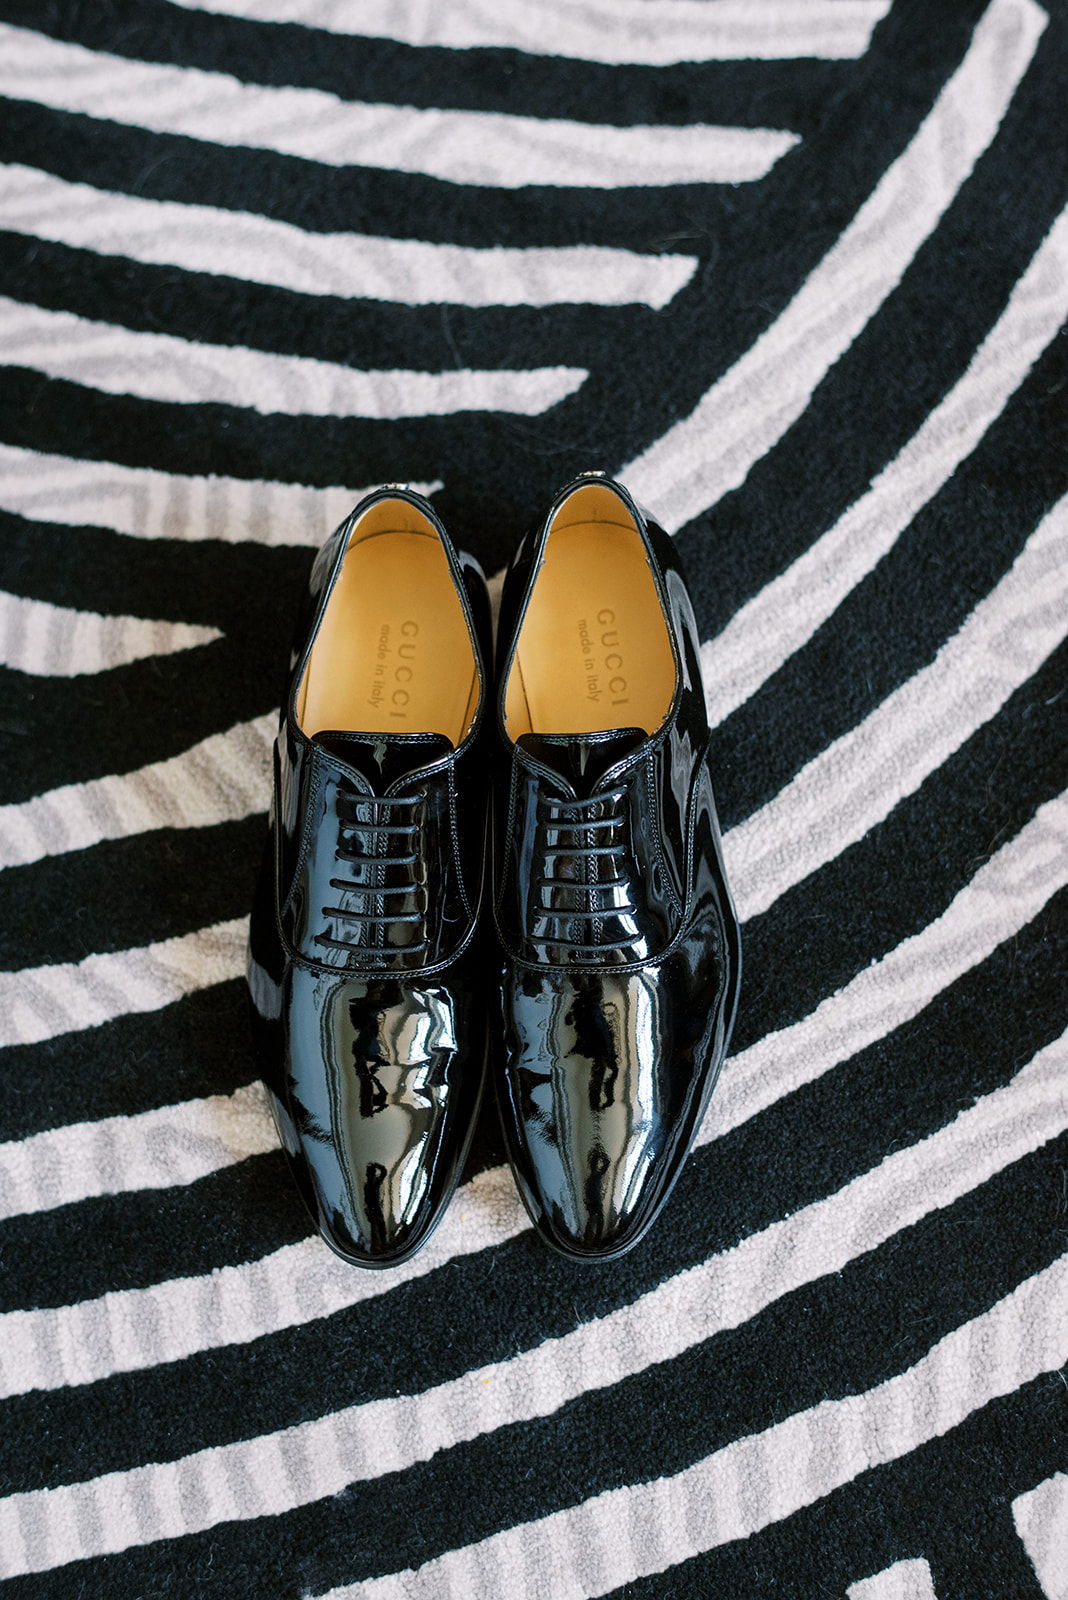 Groom's Gucci shoes against a black and white striped carpet